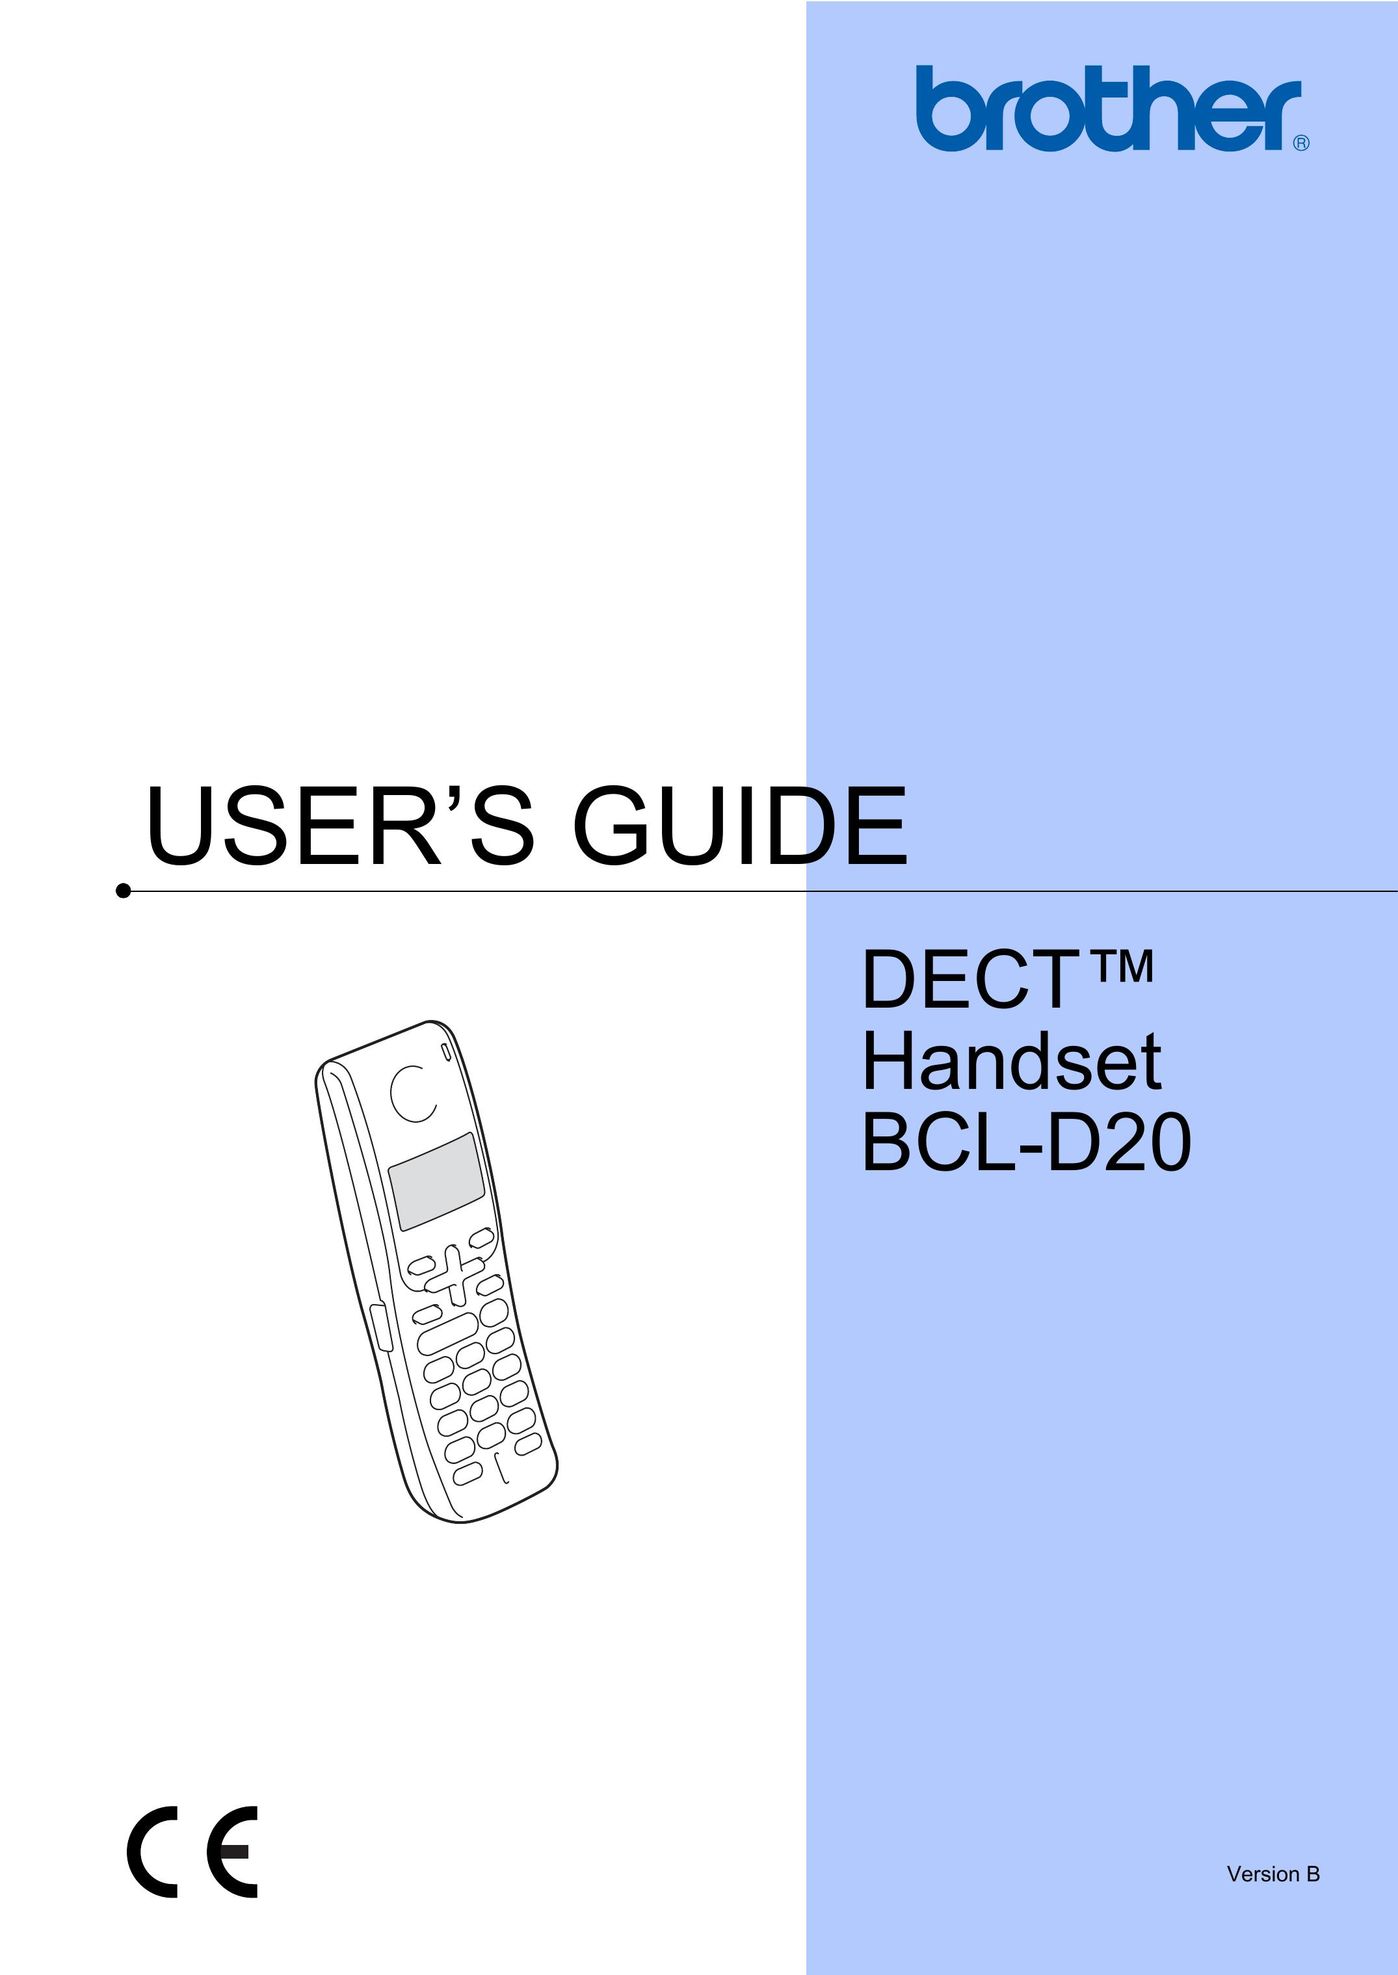 Brother BCL-D20 Cordless Telephone User Manual